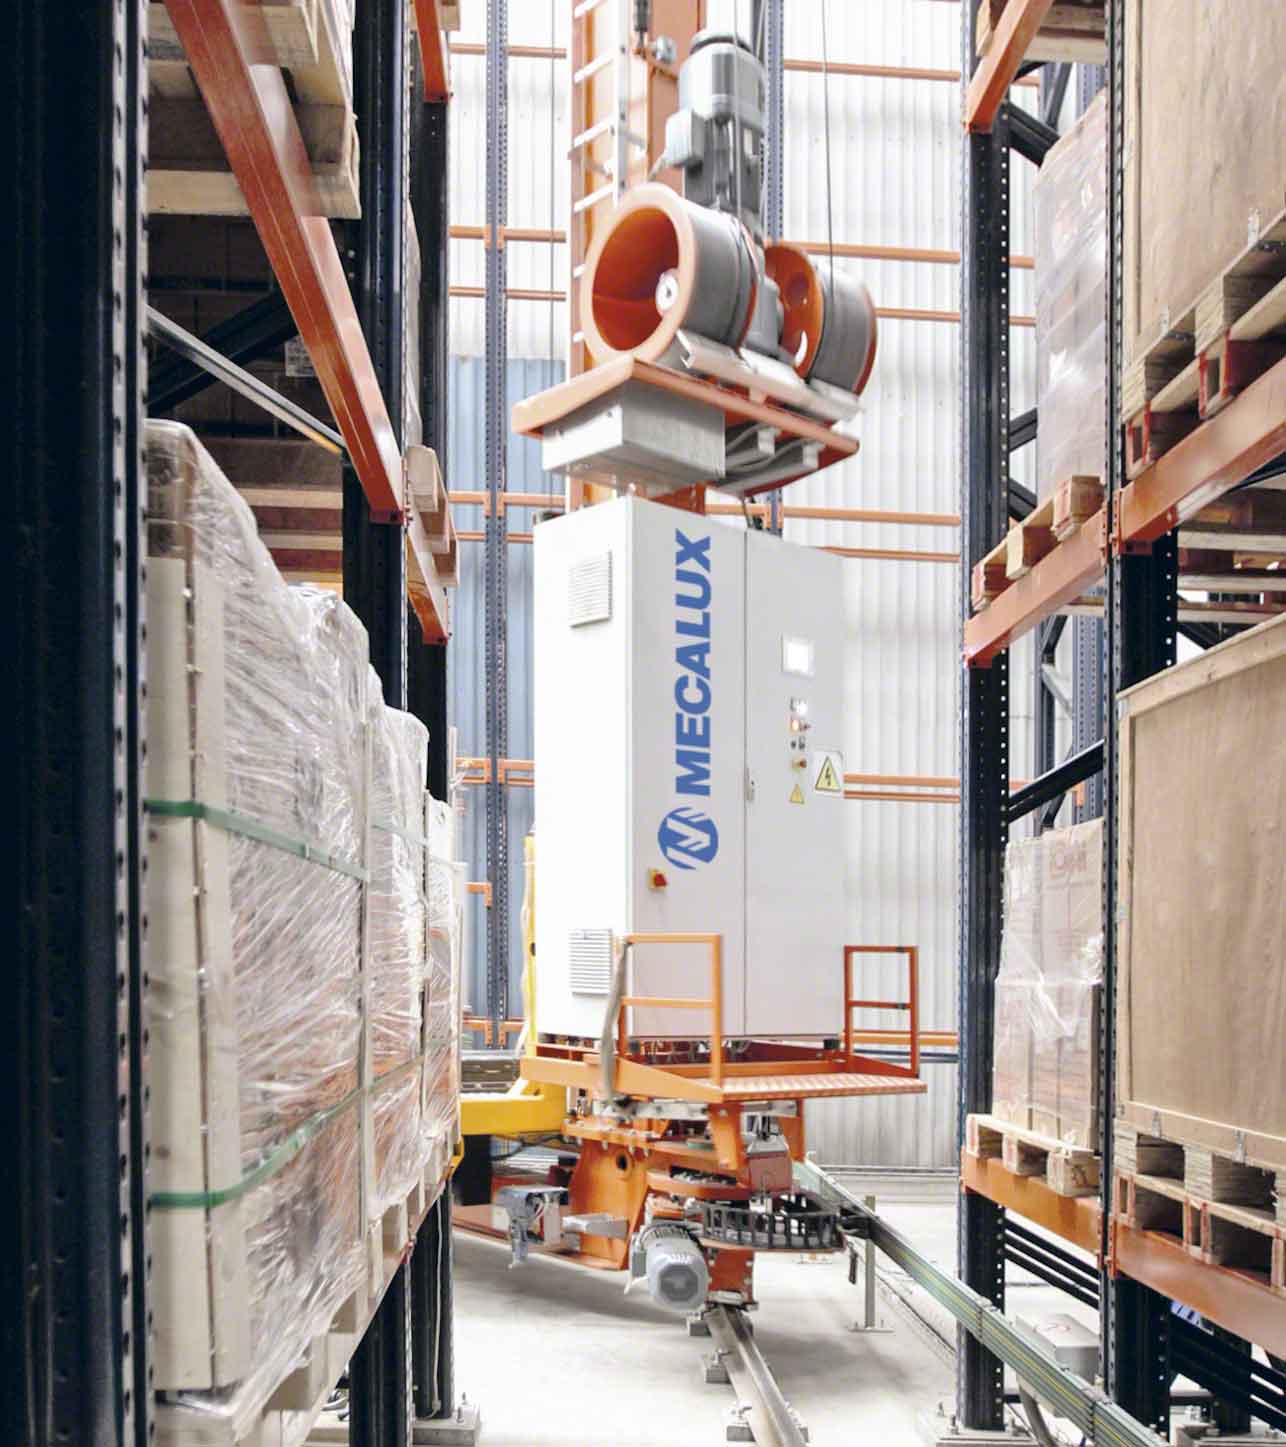 The stacker crane changes aisles via a curved track system